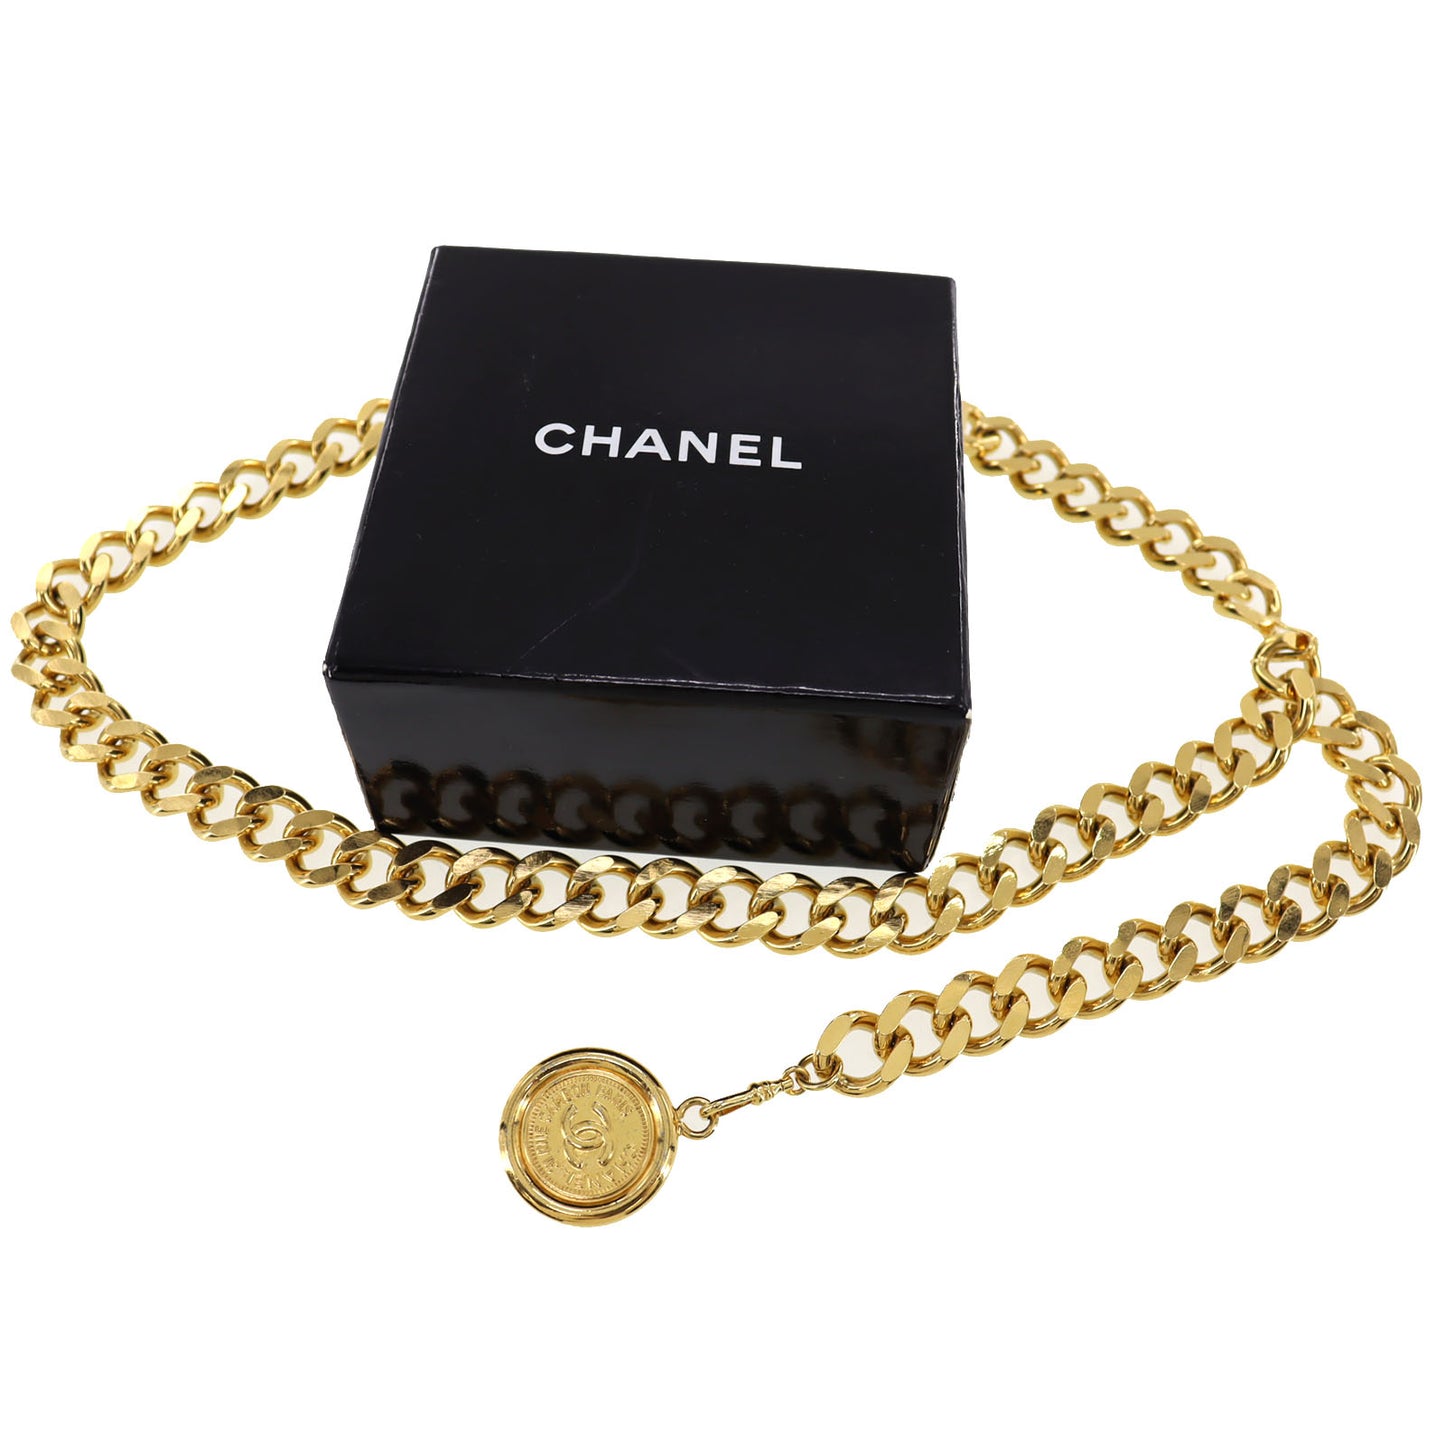 Sold at Auction: CHANEL RUE CAMBON Gold Tone Chain Belt, FRANCE